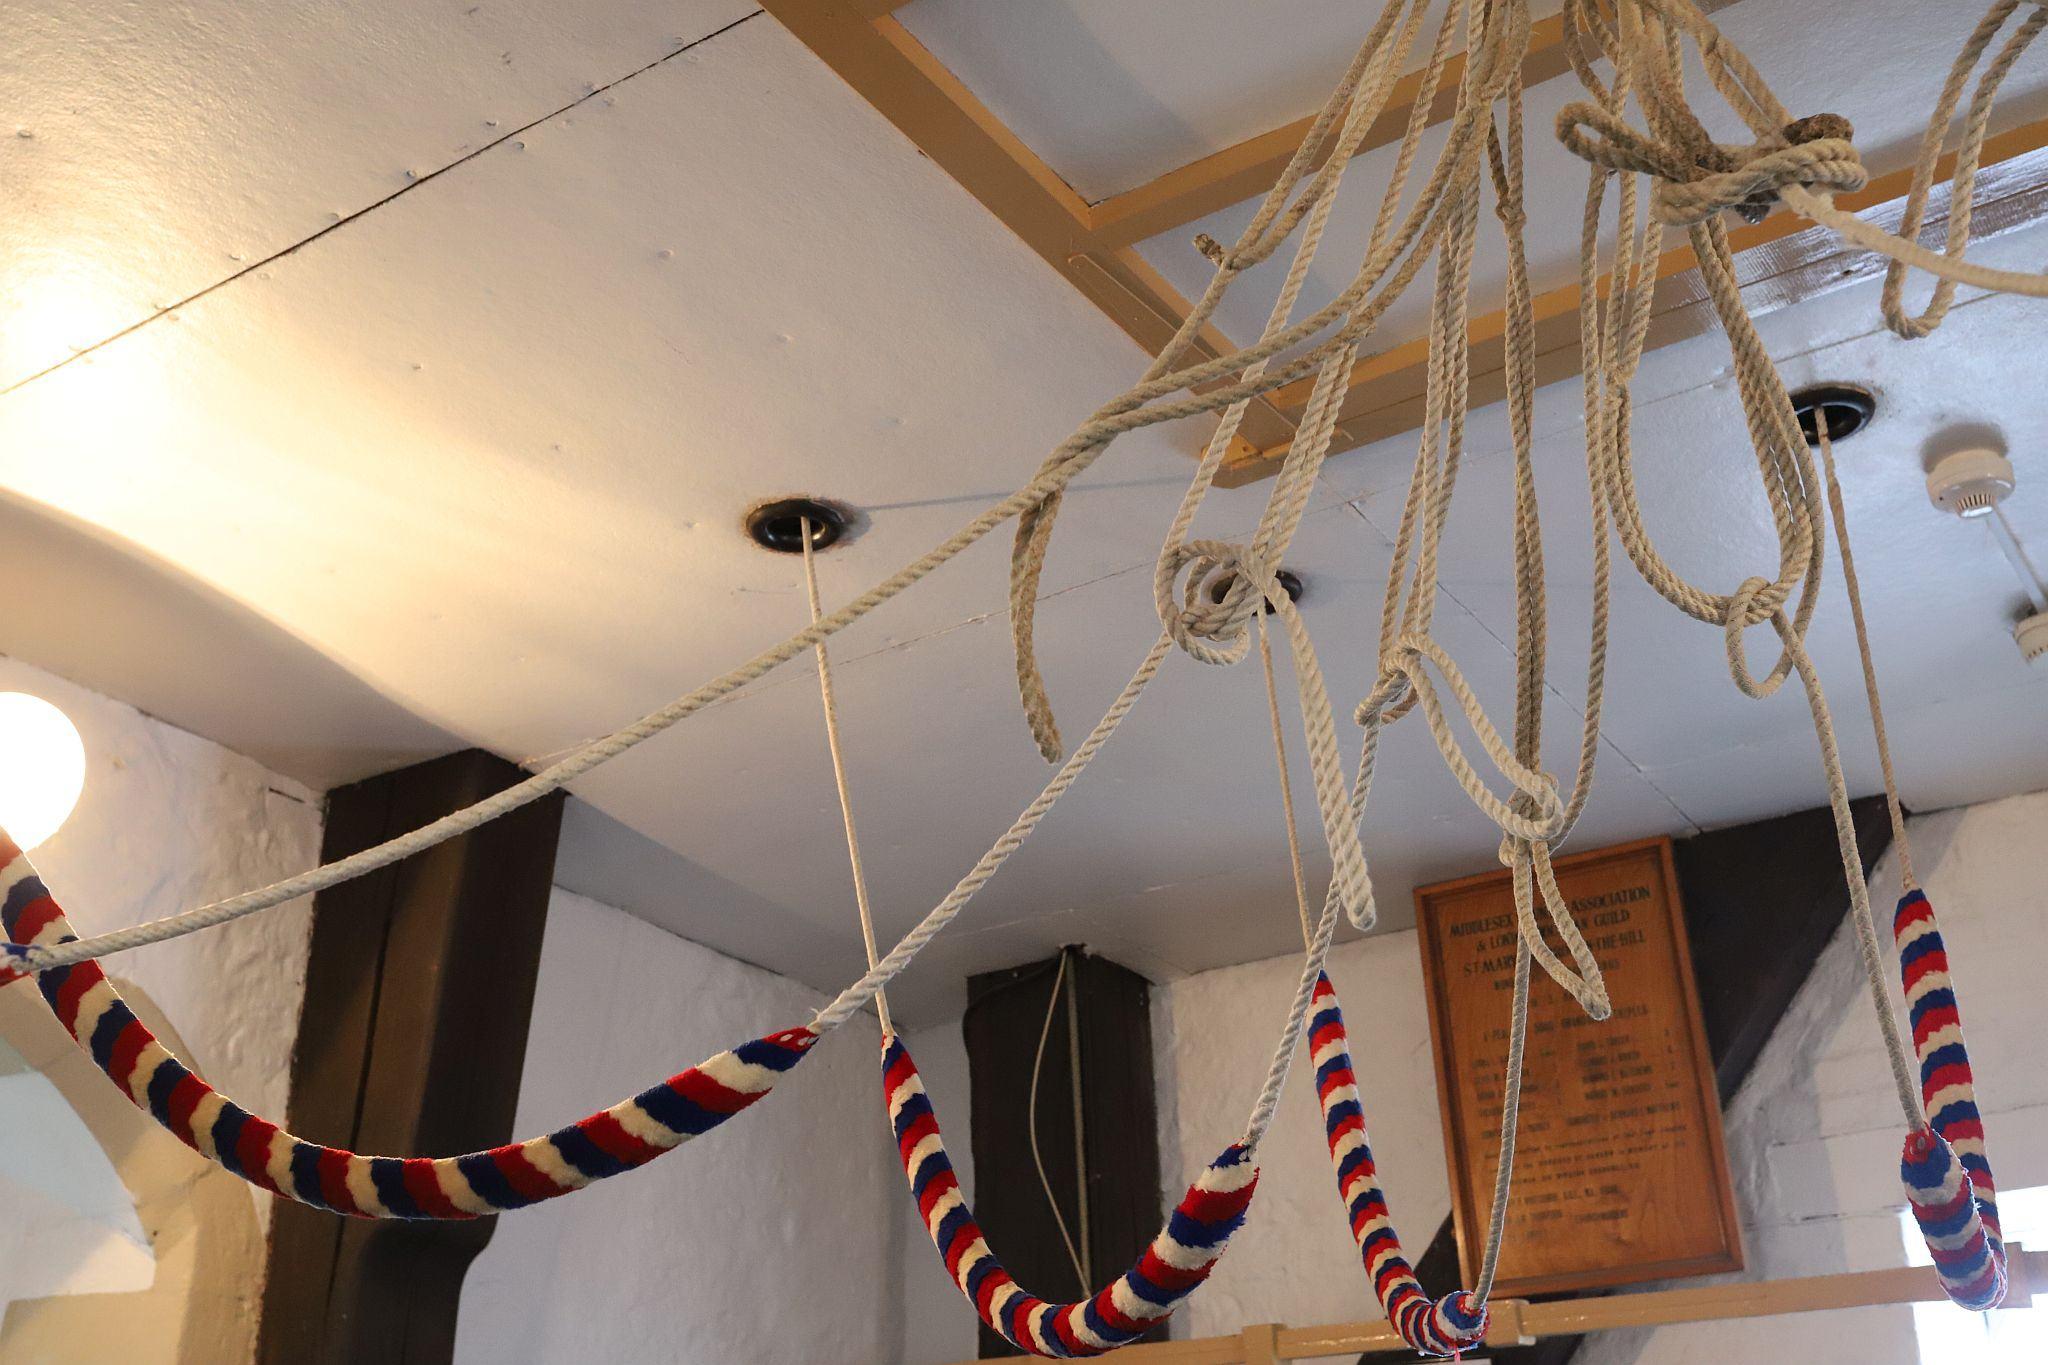 The bell ropes tied up on the ceiling. St Mary’s Church, Harrow-on-the-Hill, London. 29-Apr-2023.